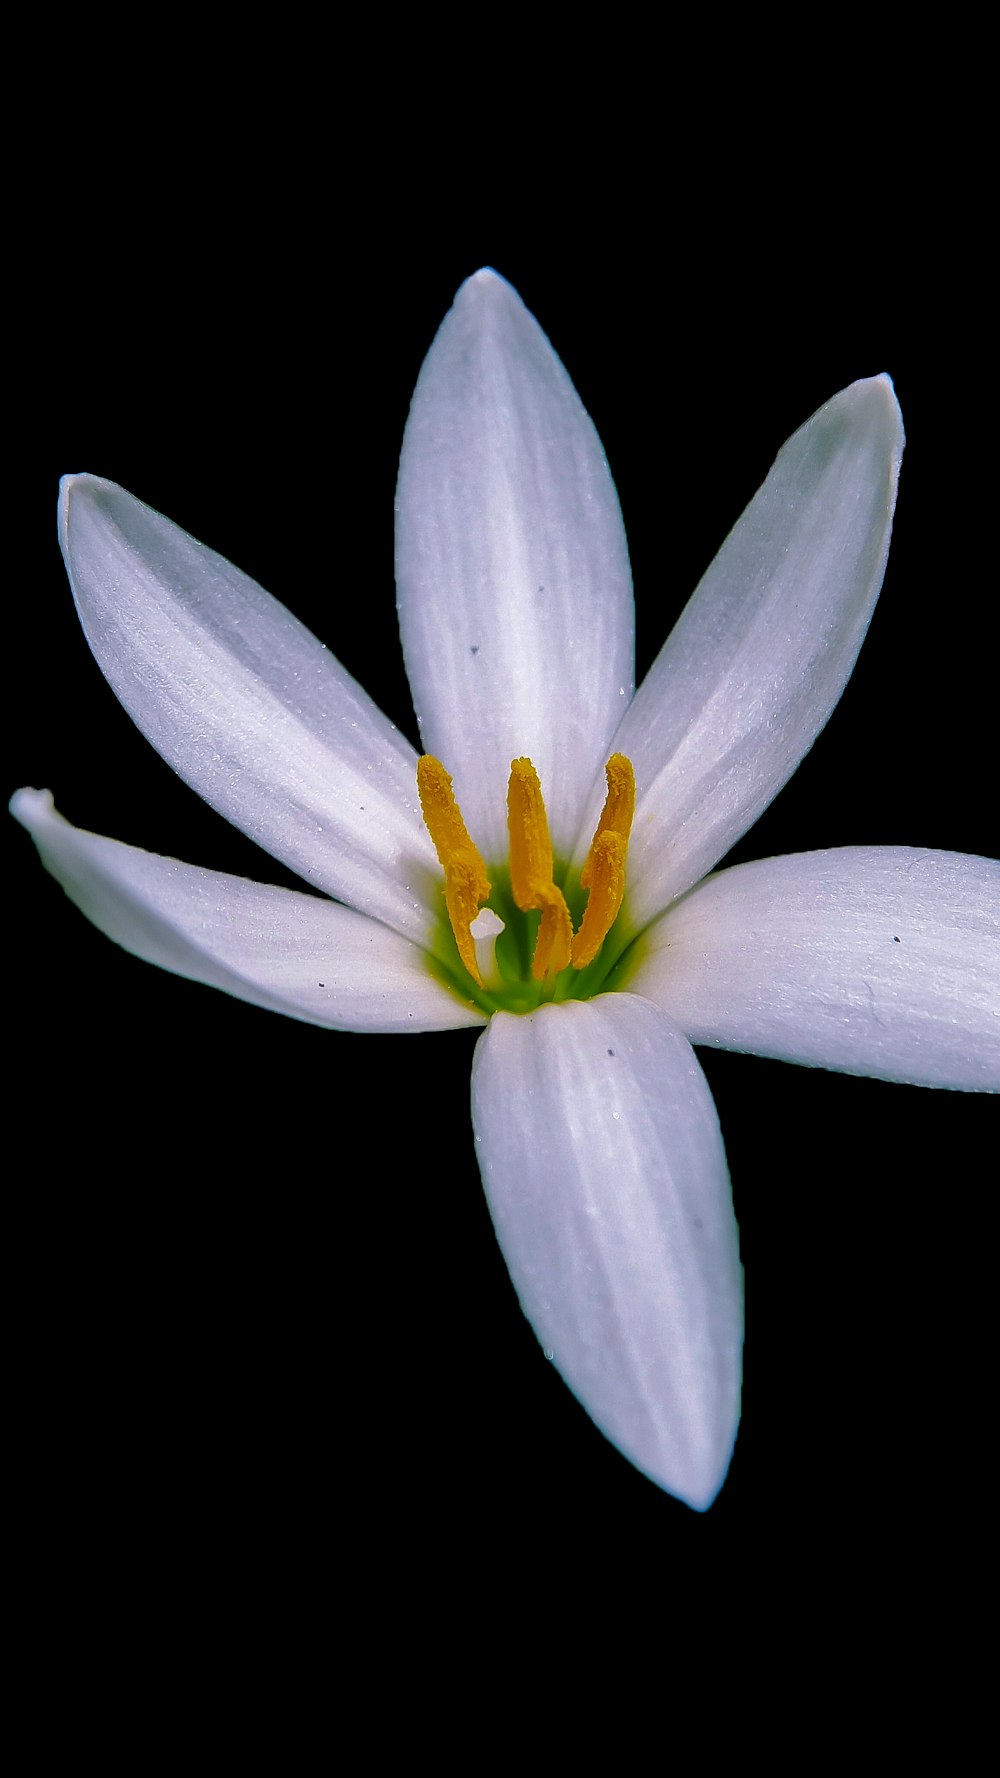 white and yellow flower in black background